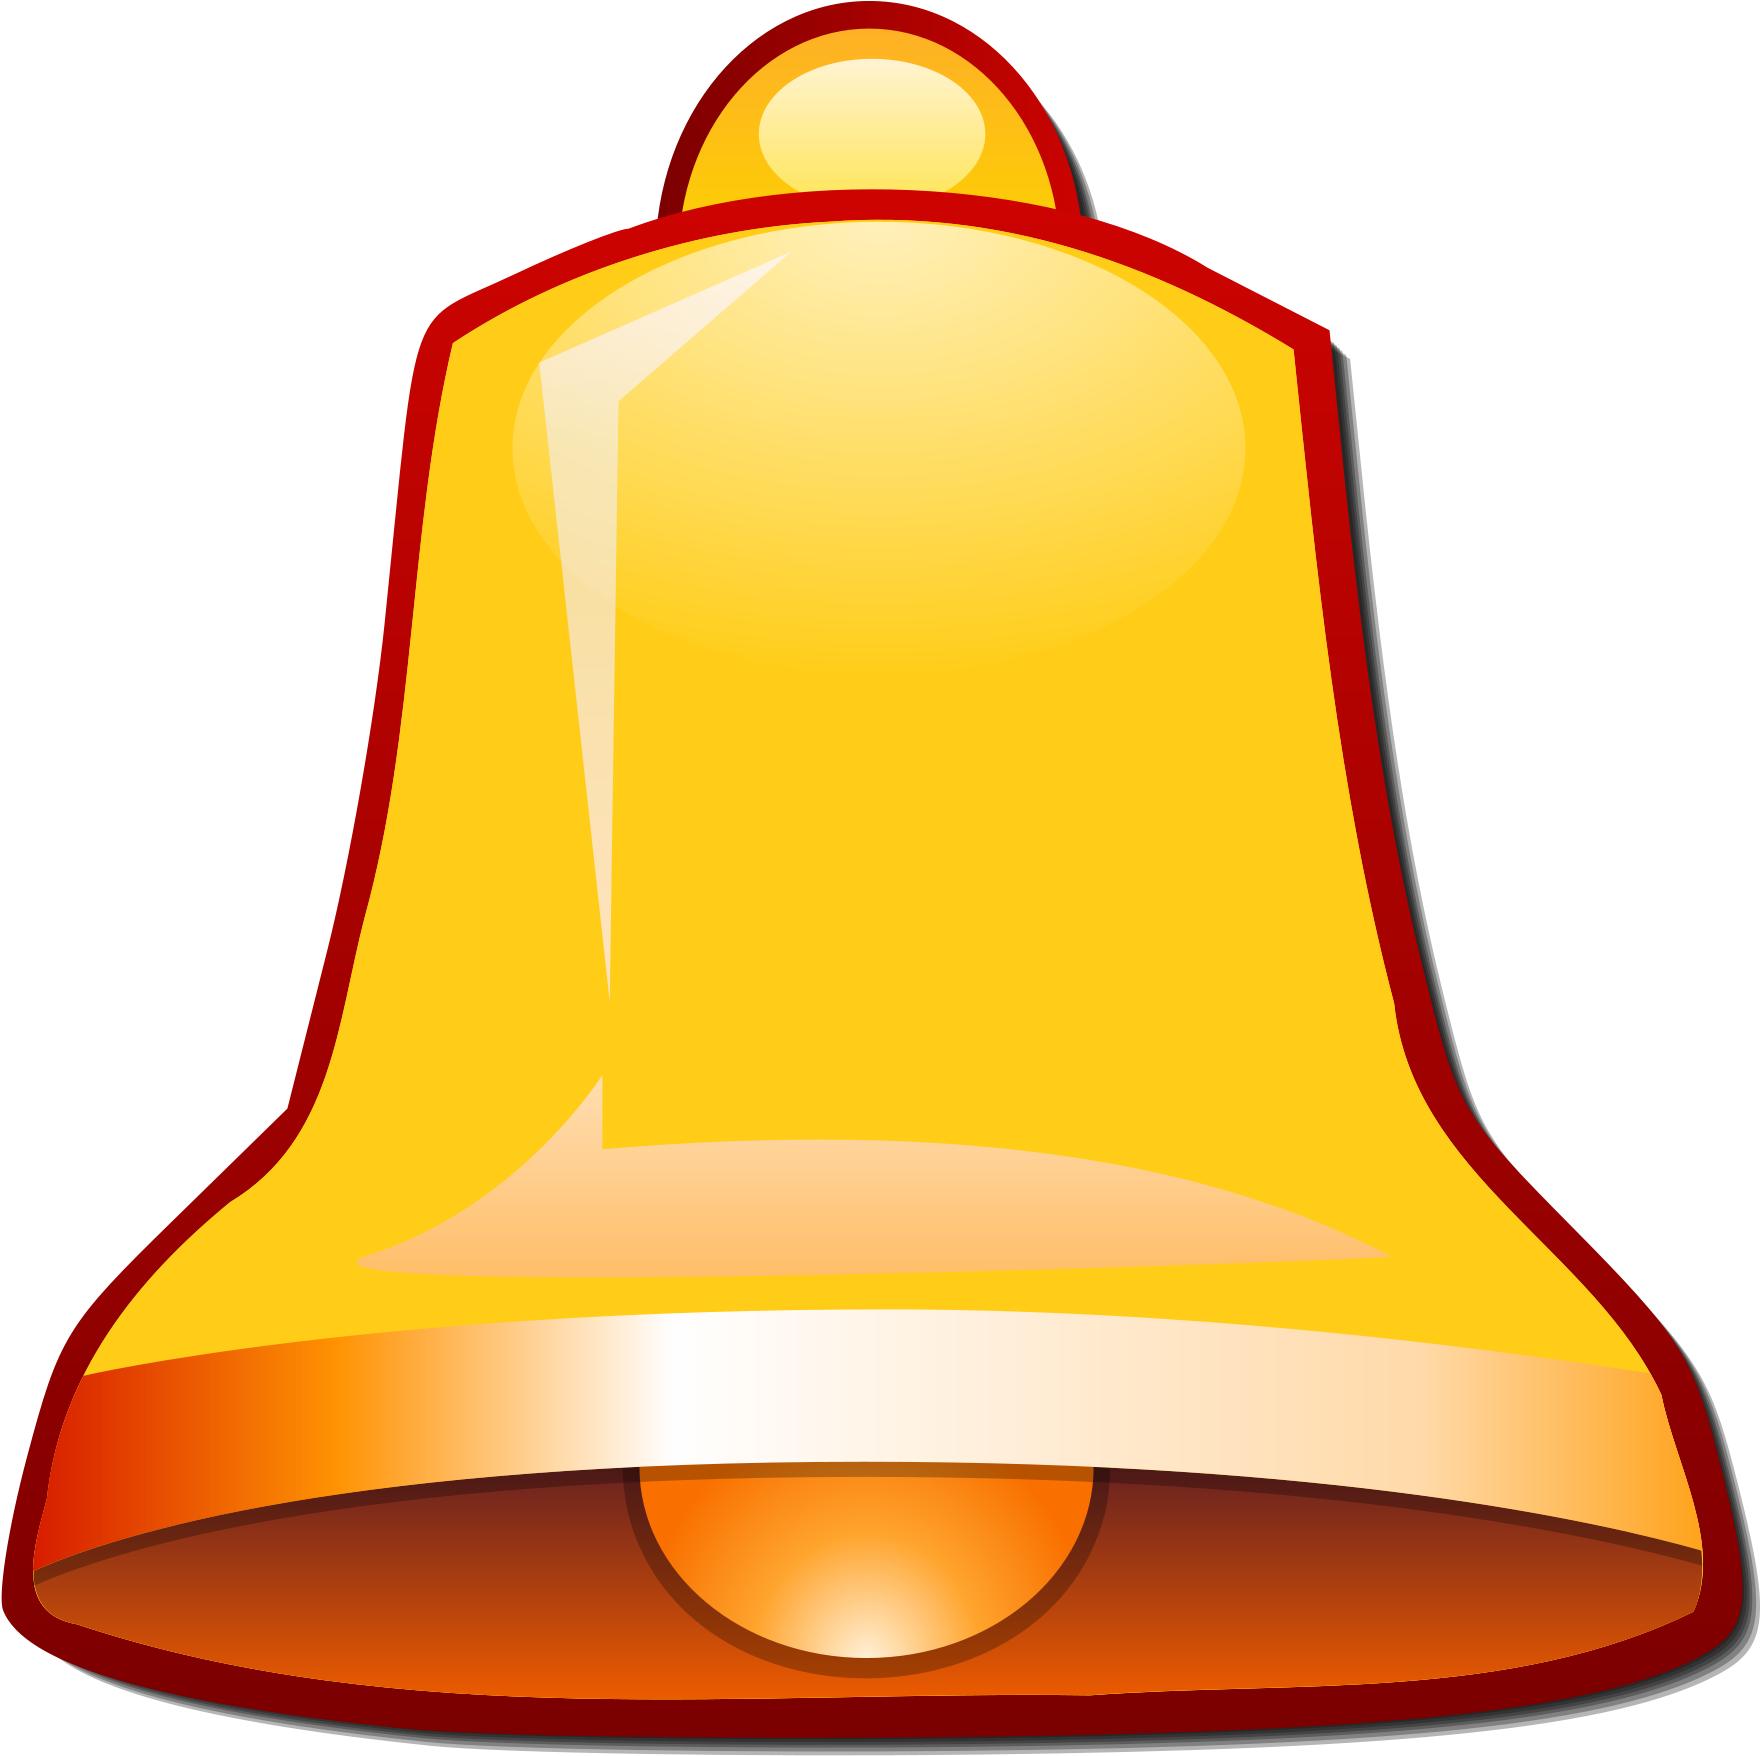 Download PNG image - YouTube Bell Icon PNG Transparent Image 